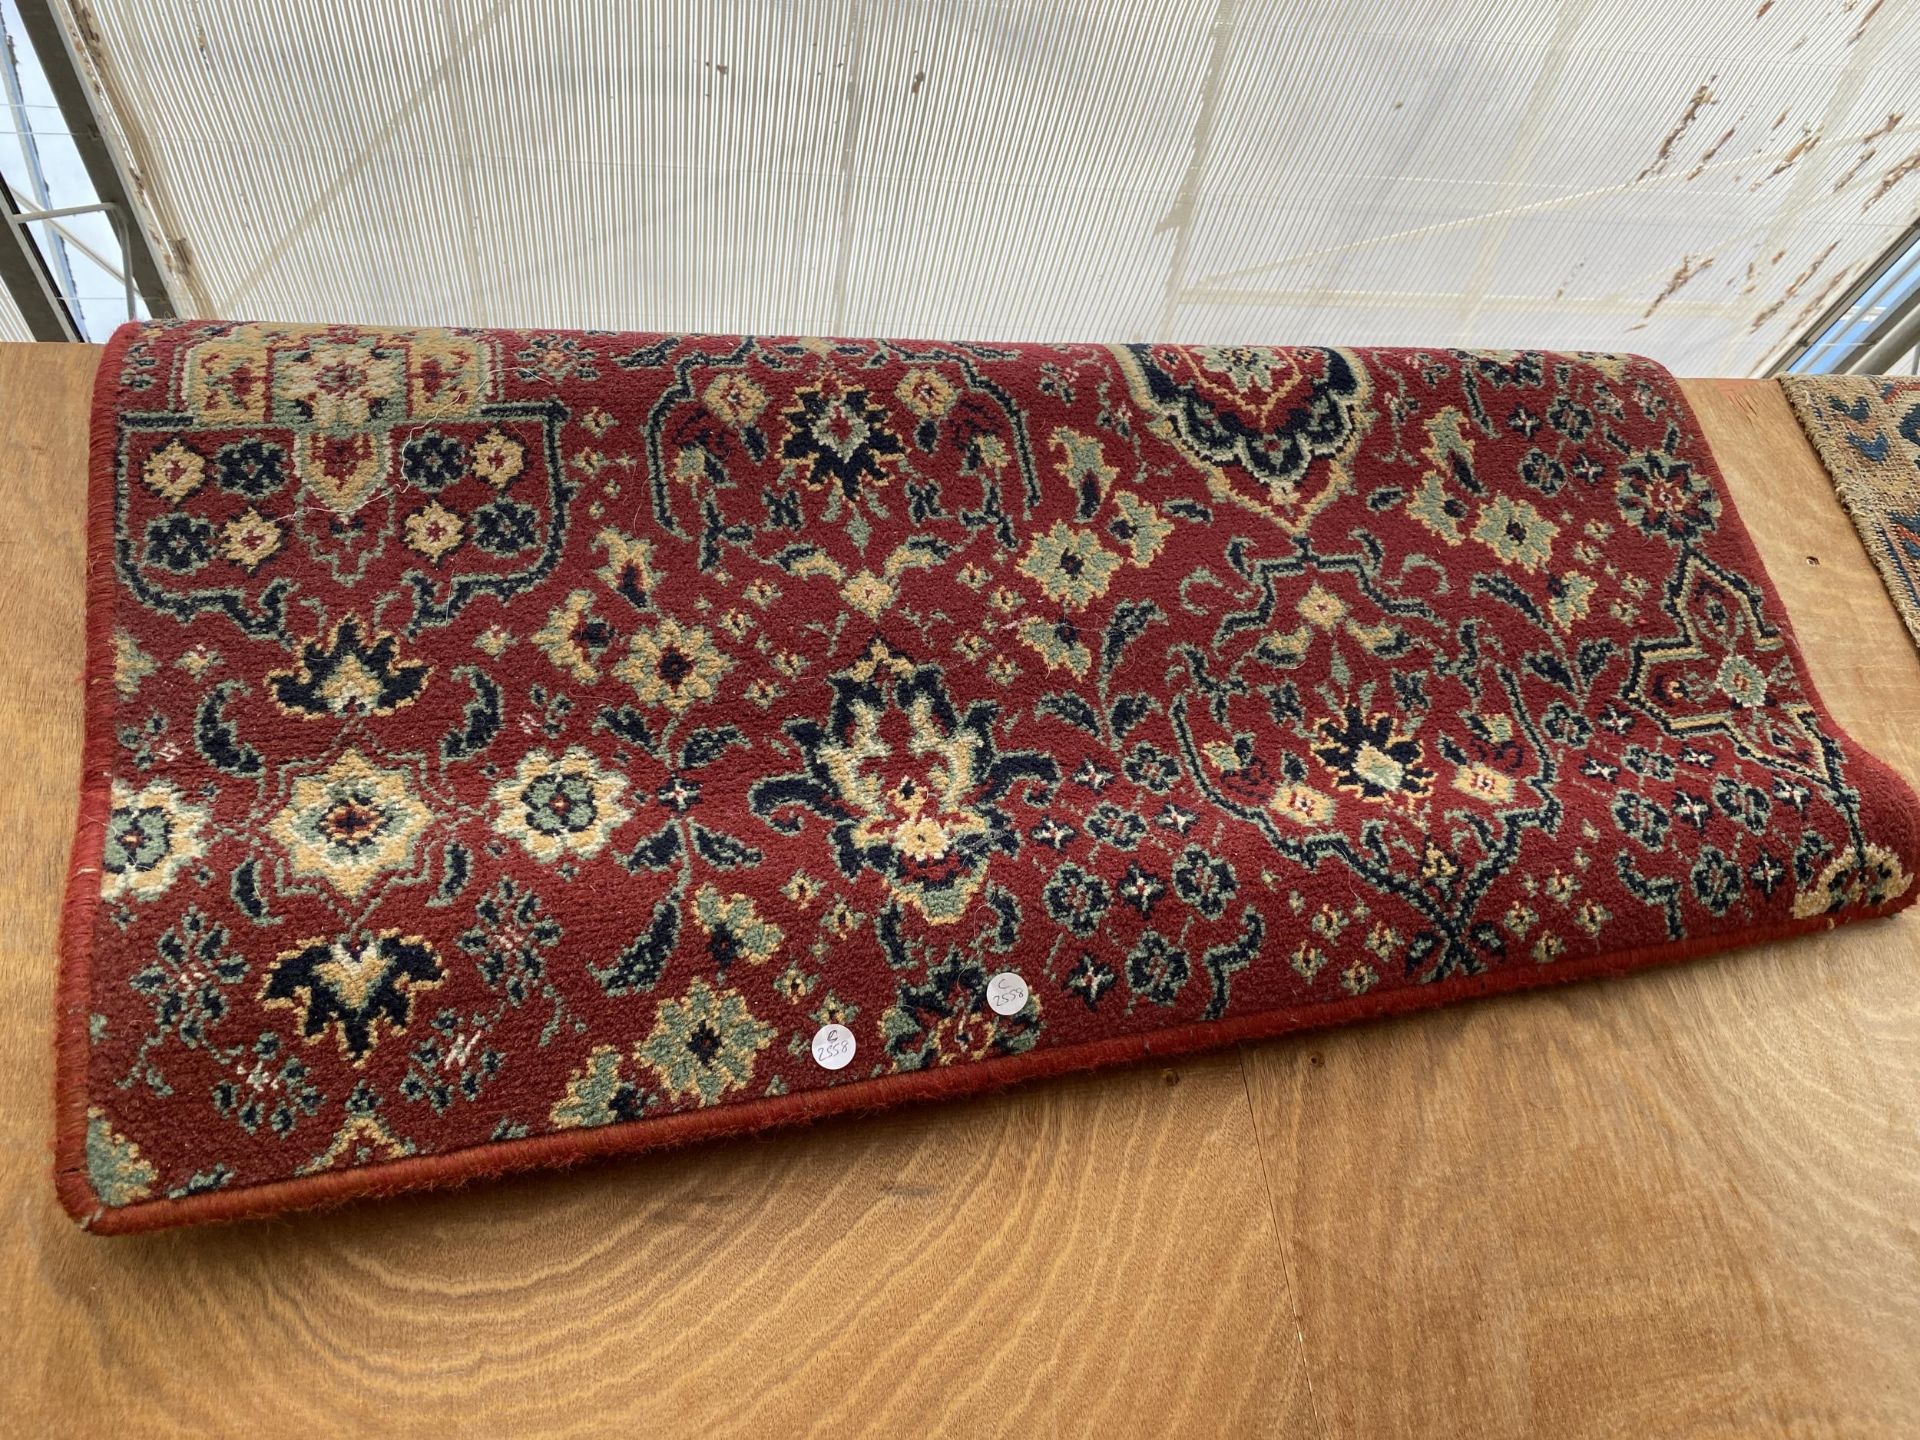 A SMALL RED PATTERNED RUG